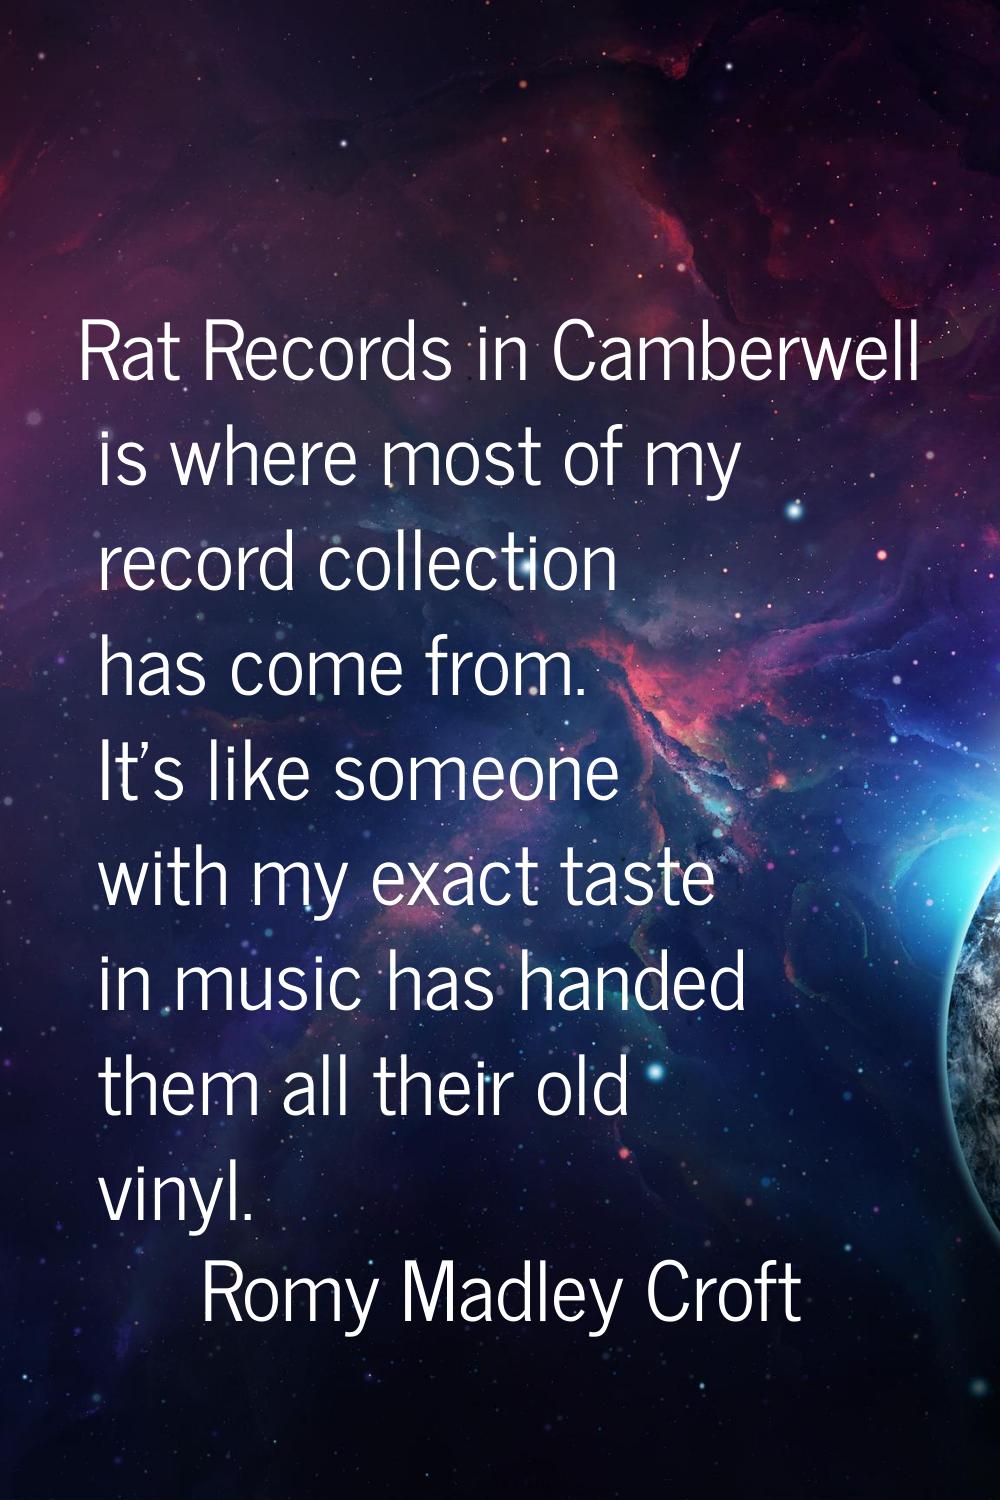 Rat Records in Camberwell is where most of my record collection has come from. It's like someone wi